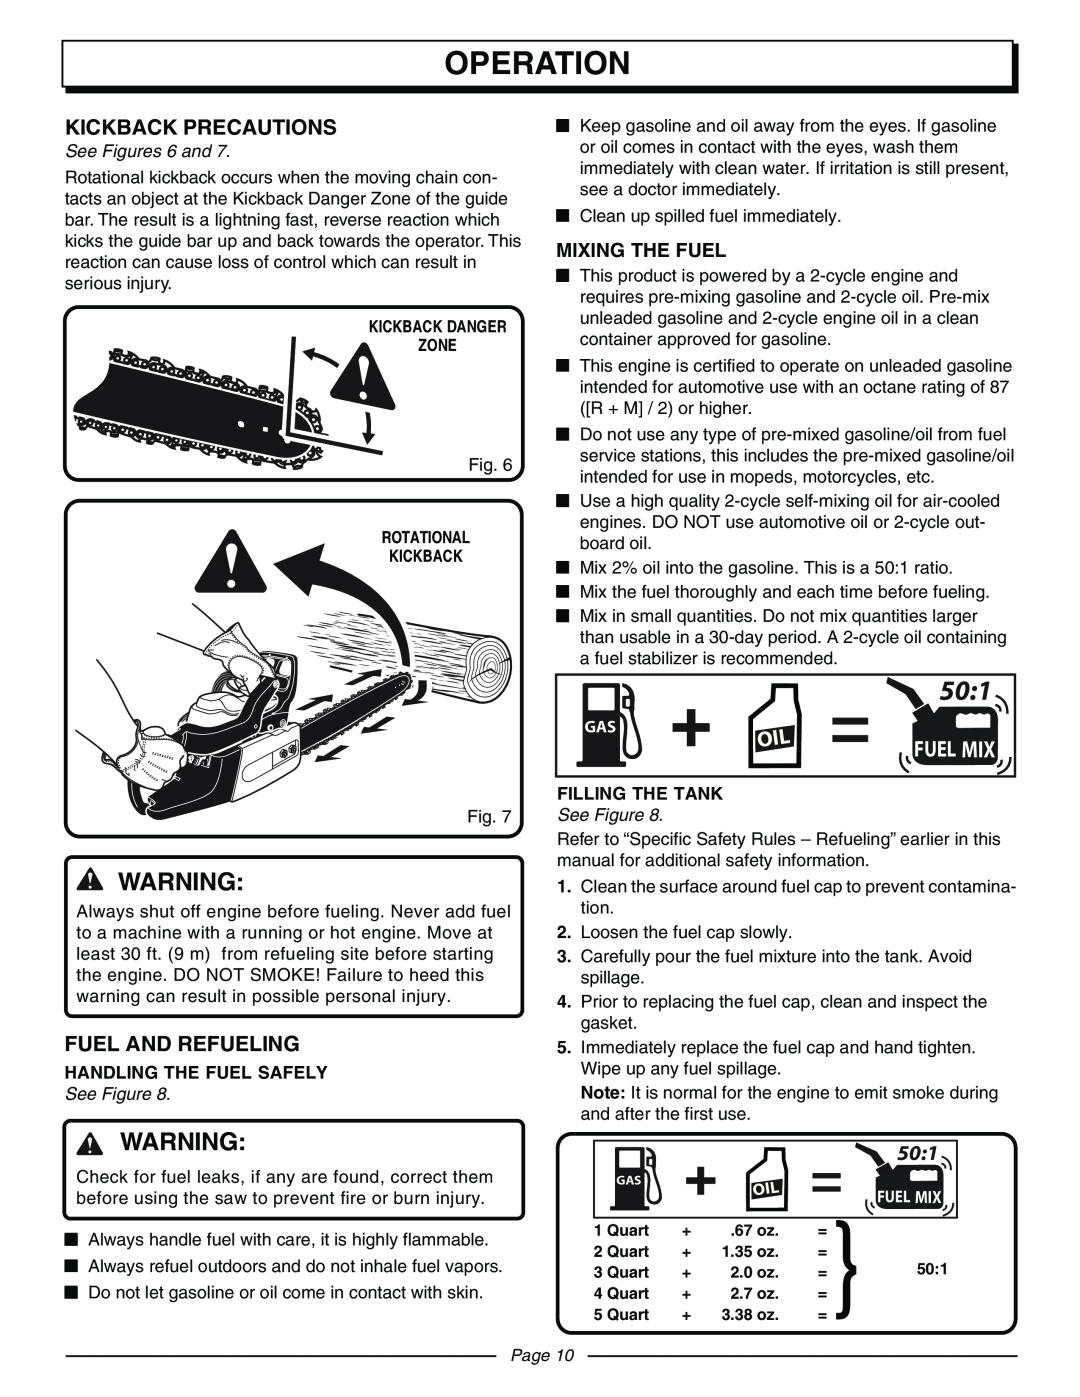 Homelite UT10942D manual Kickback Precautions, Fuel And Refueling, Operation, Mixing The Fuel, See Figures 6 and, Page 